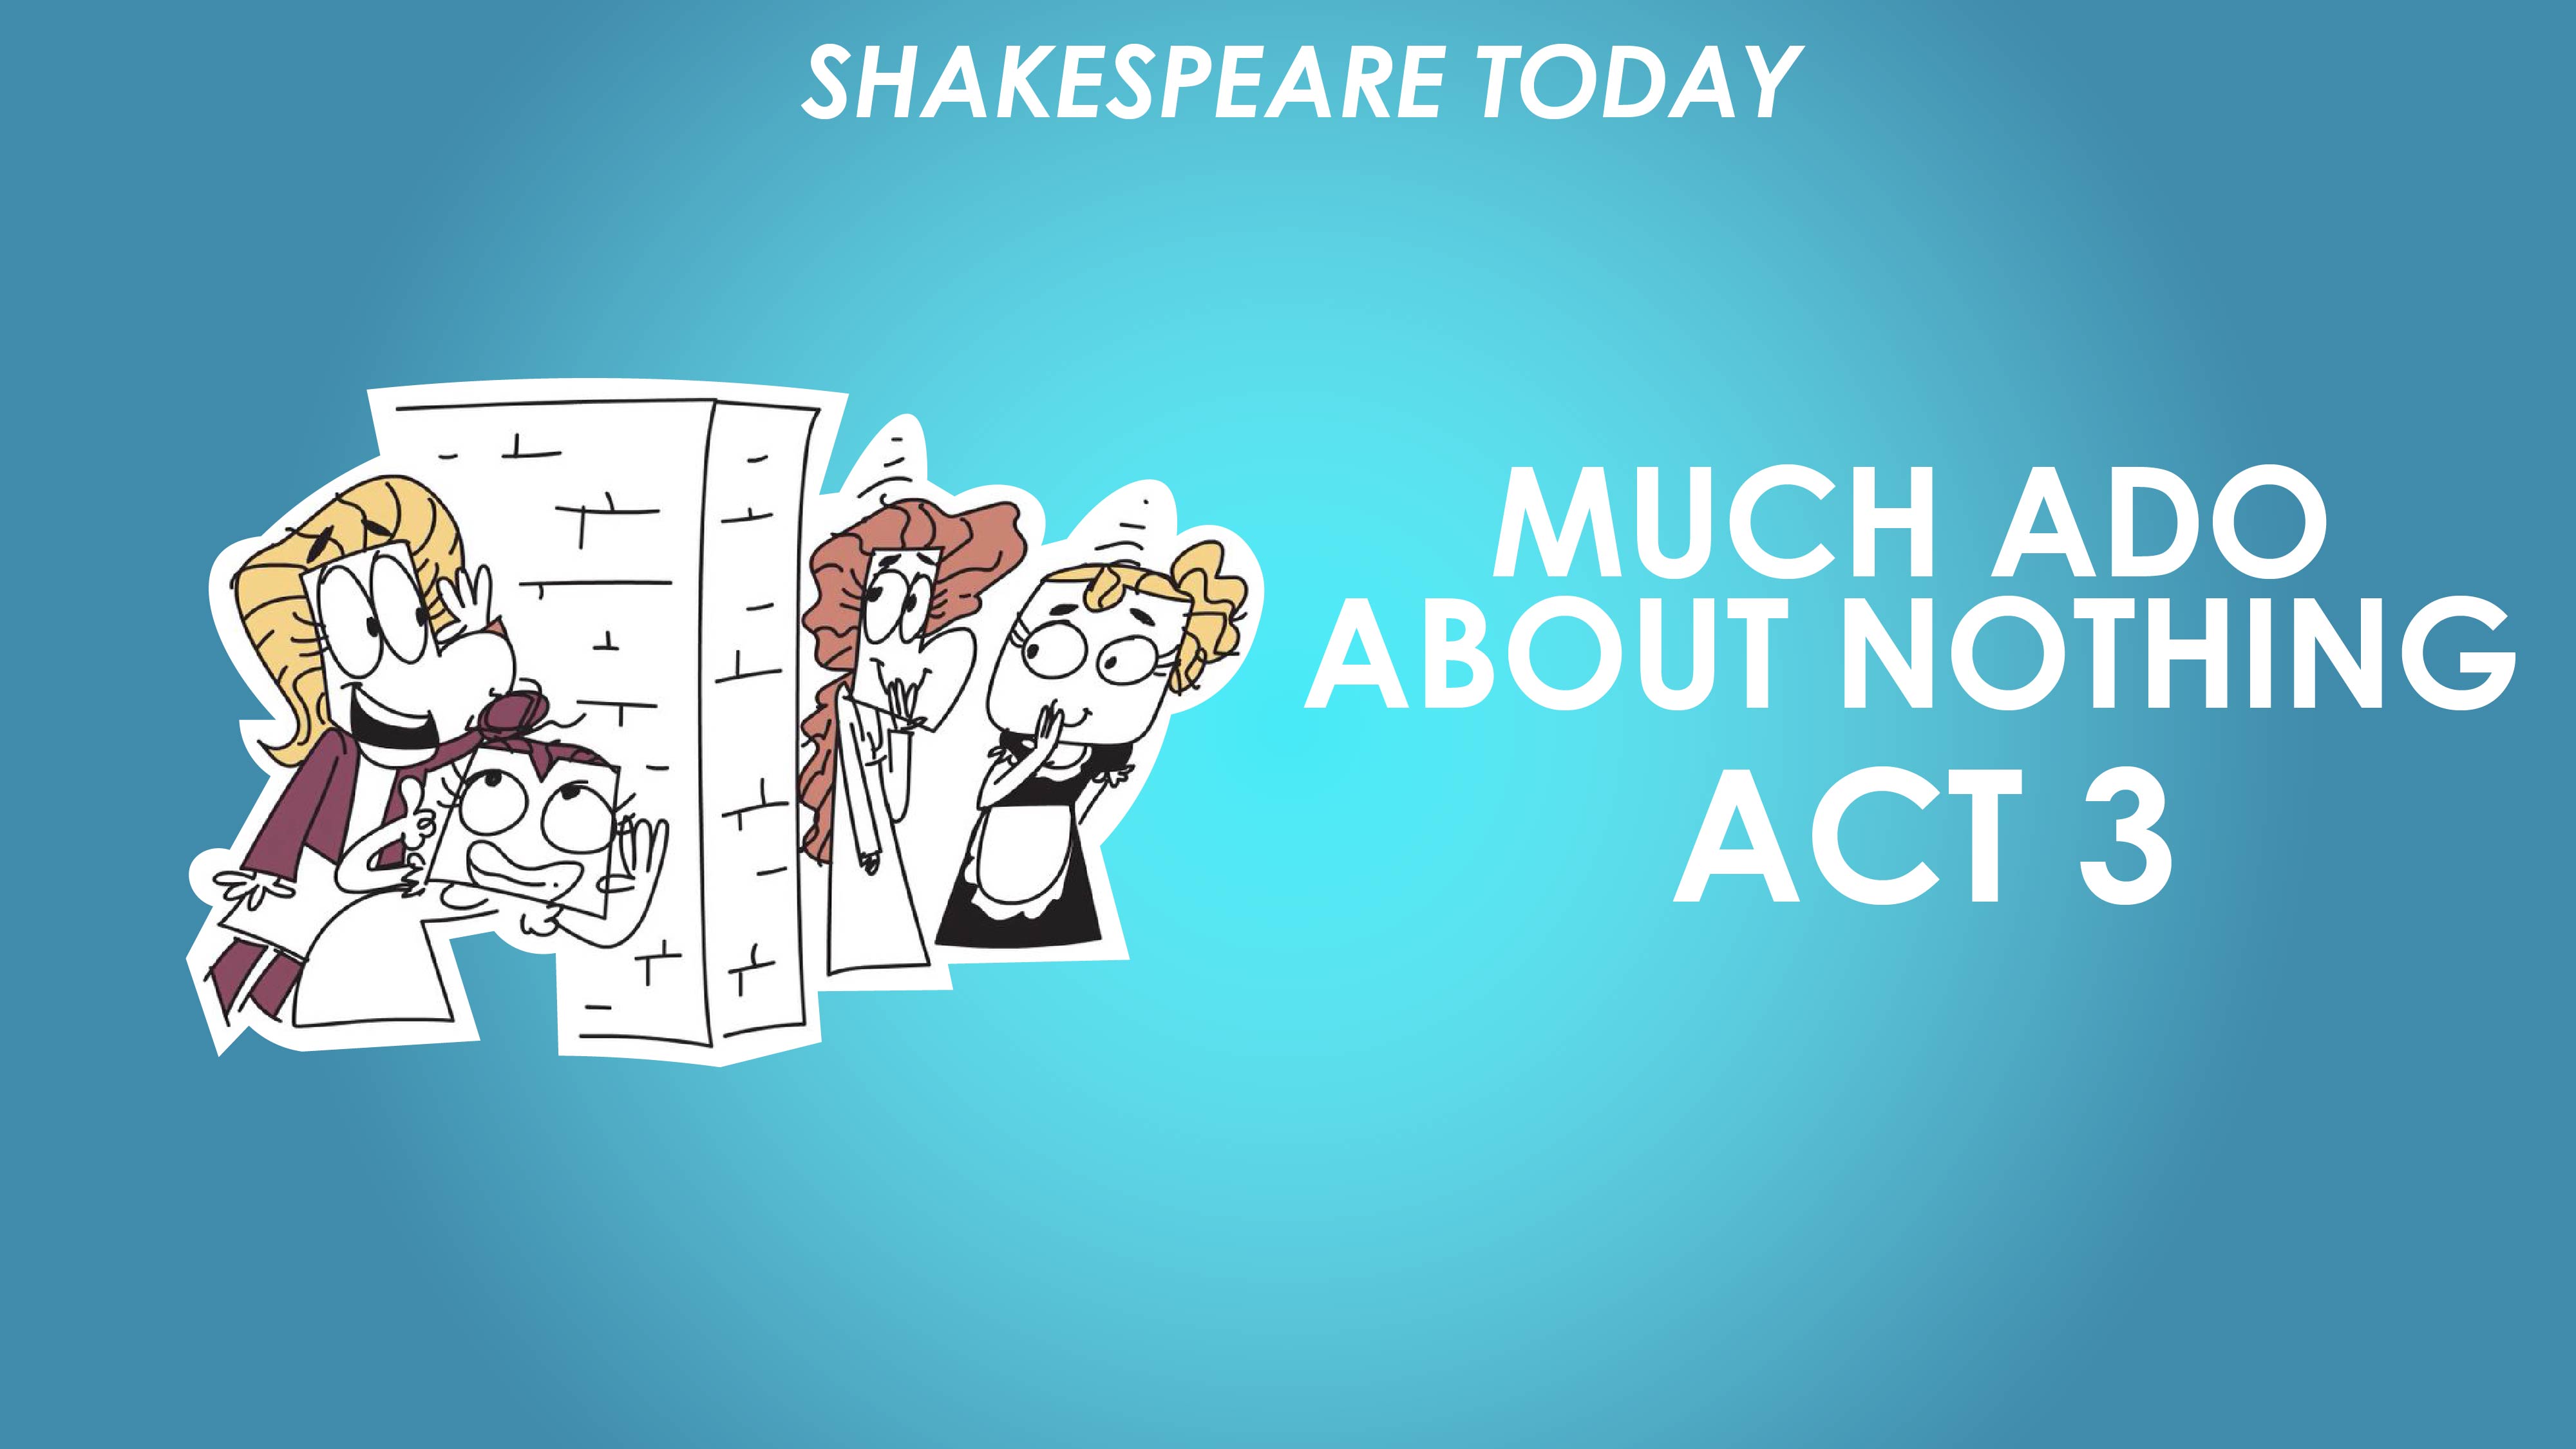 Much Ado About Nothing Act 3 - Shakespeare Today Series